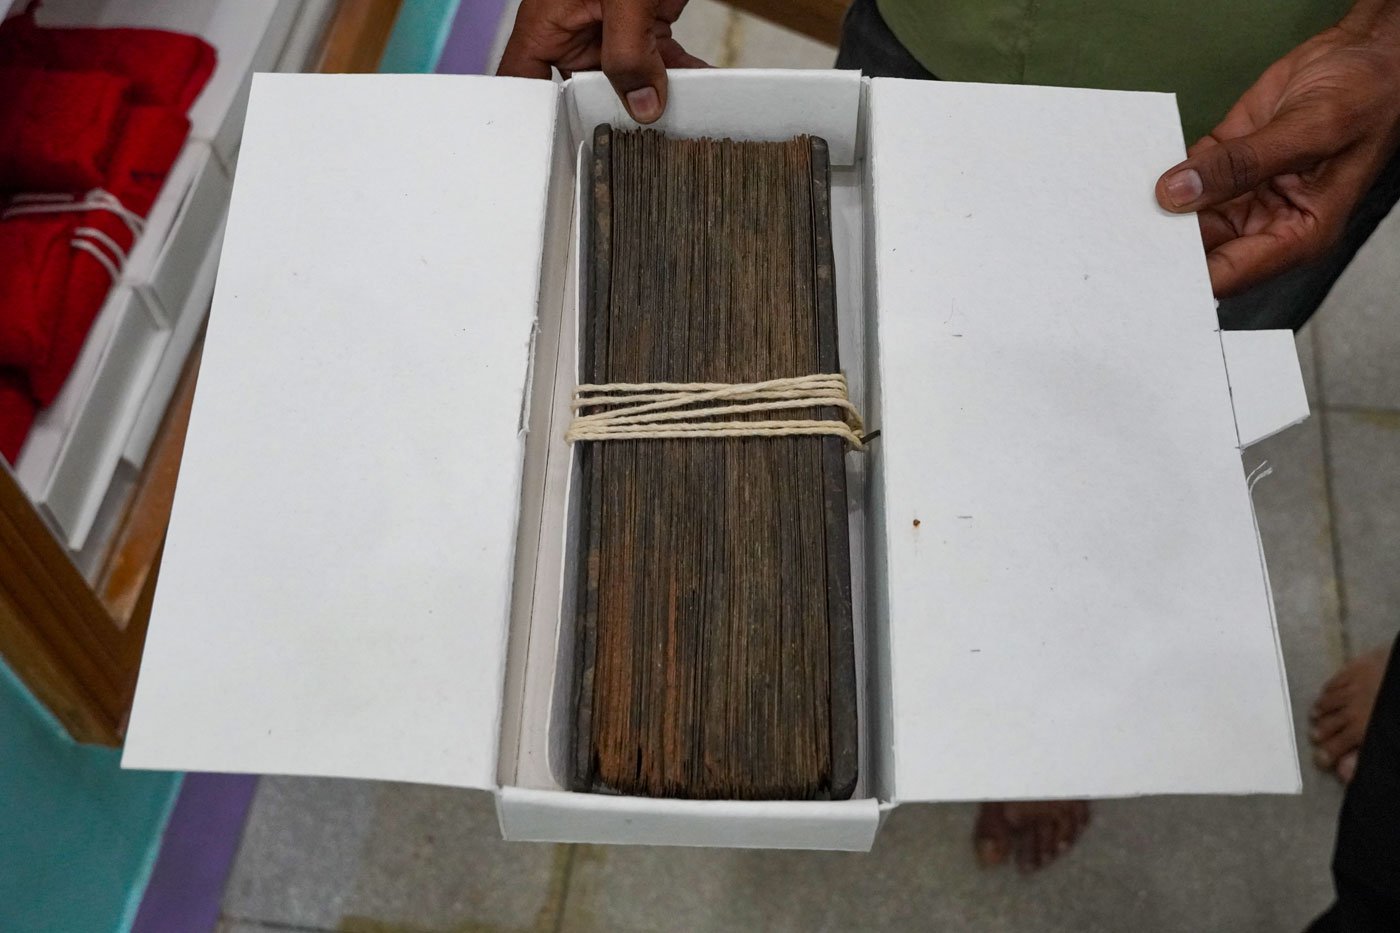 A few 1,000-year-old manuscripts are kept in boxes that only library staff can access